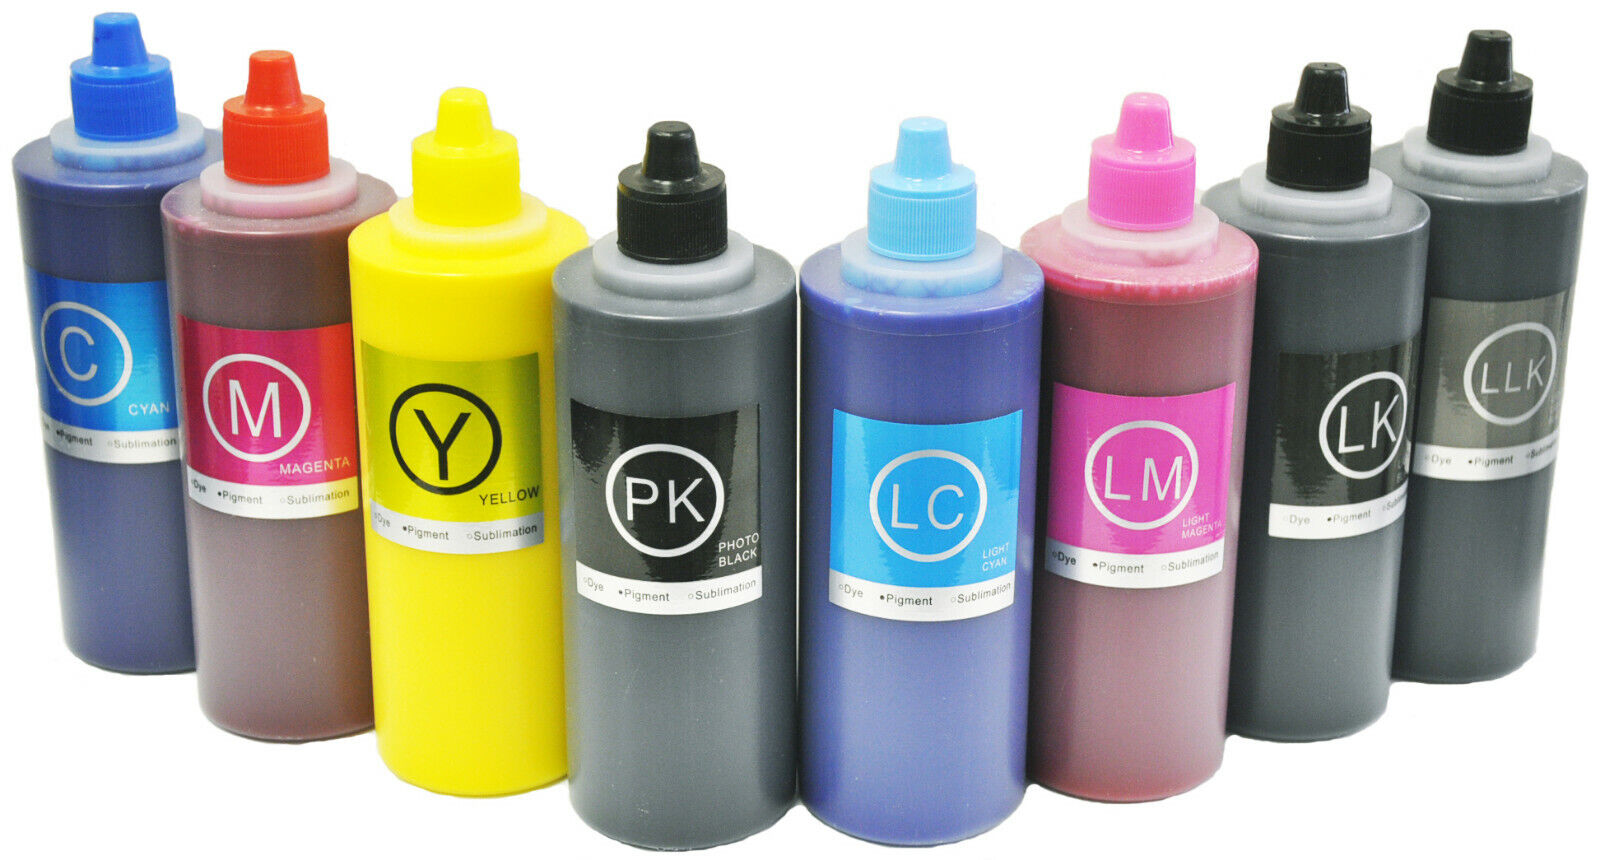 8x100ml UltraChrome K3 Pigment Compatible Ink for Pro 3800 4800 7800 9800